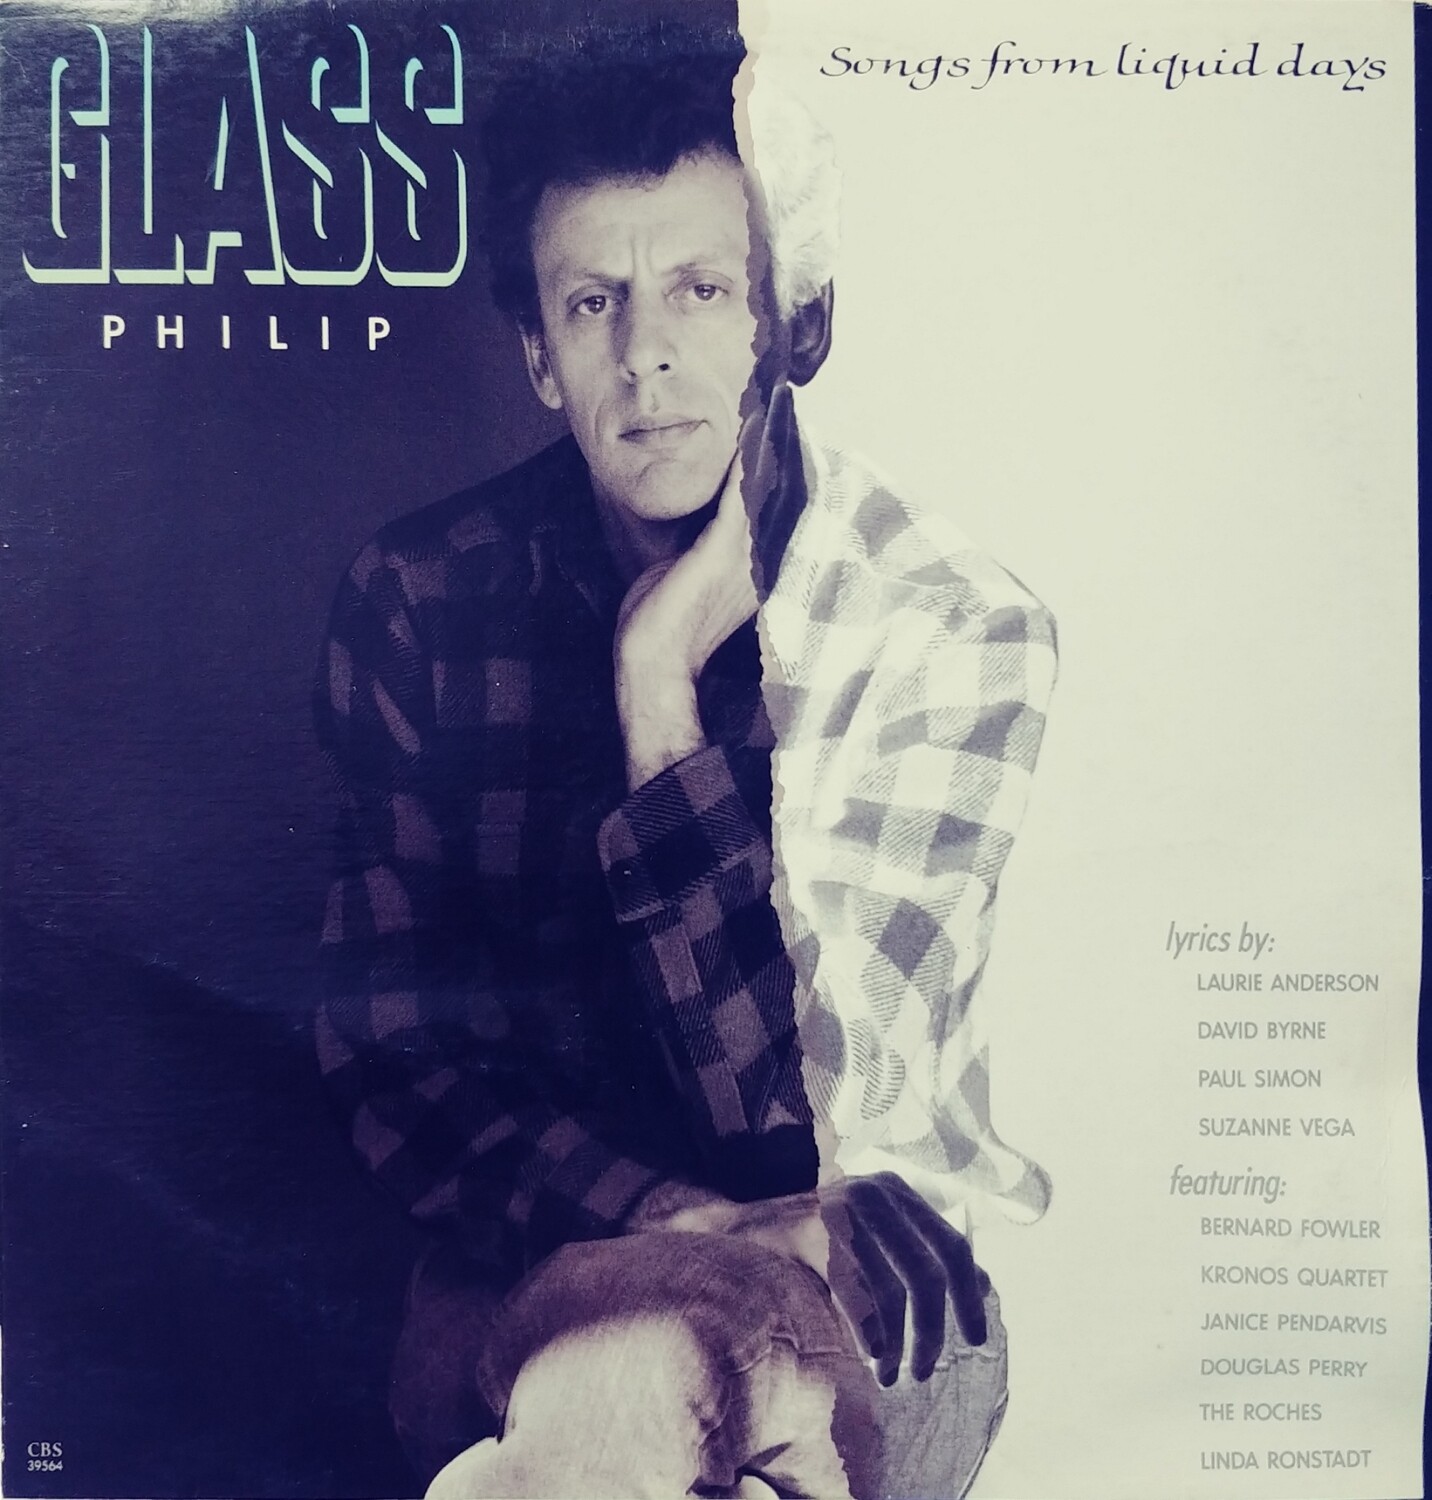 Philip Glass - Songs from liquid days